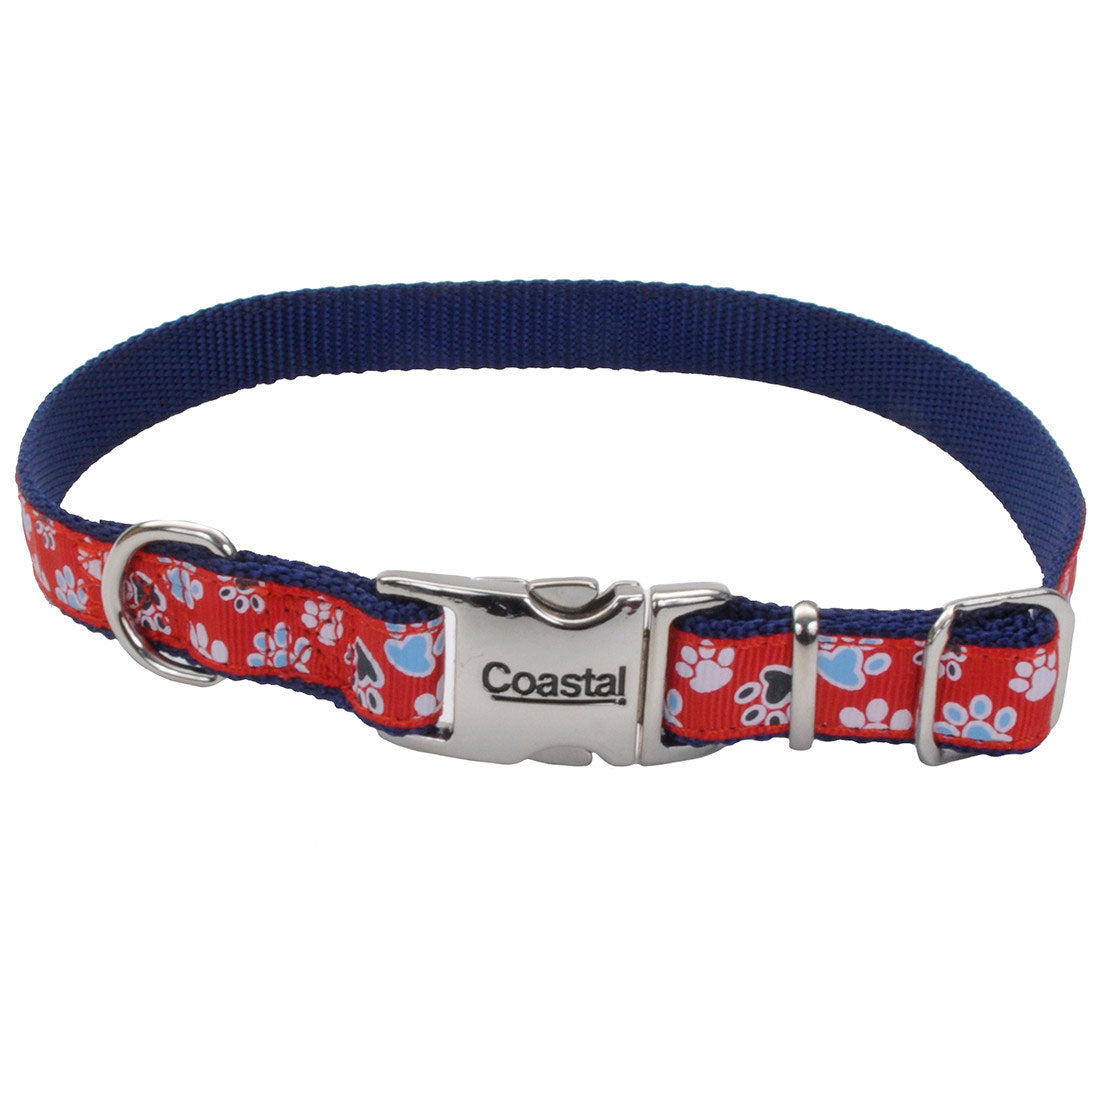 Coastal Ribbon Adjustable Dog Collar with Metal Clip Red Paw S/M